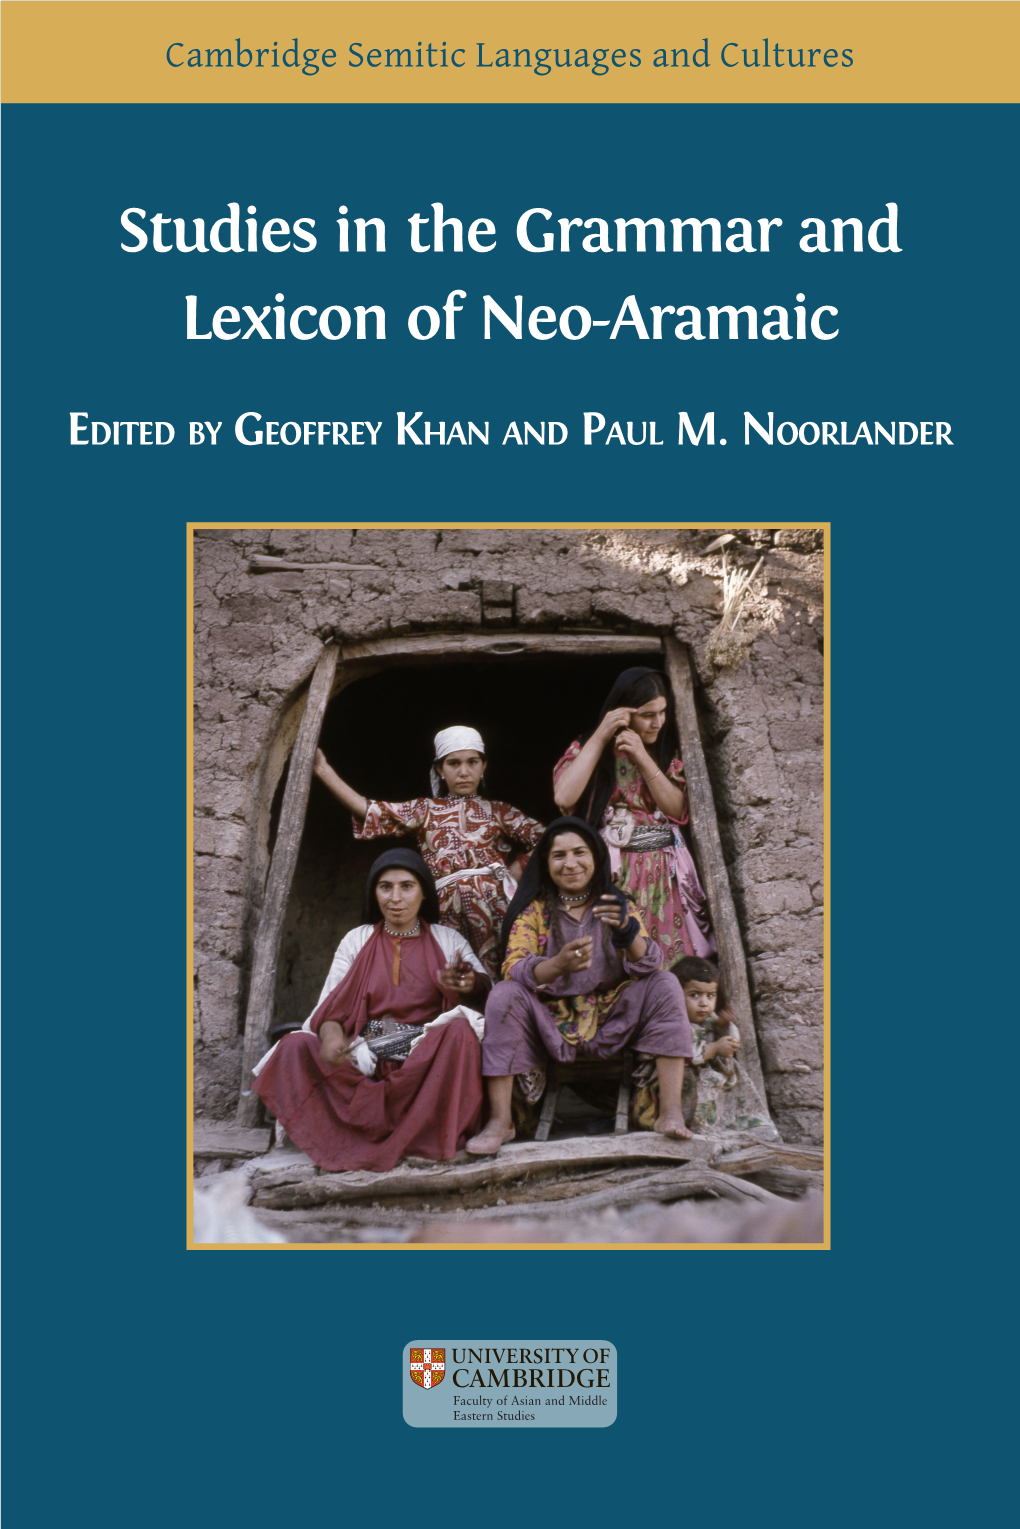 The Re-Emergence of the Genitive in North-Eastern Neo-Aramaic1